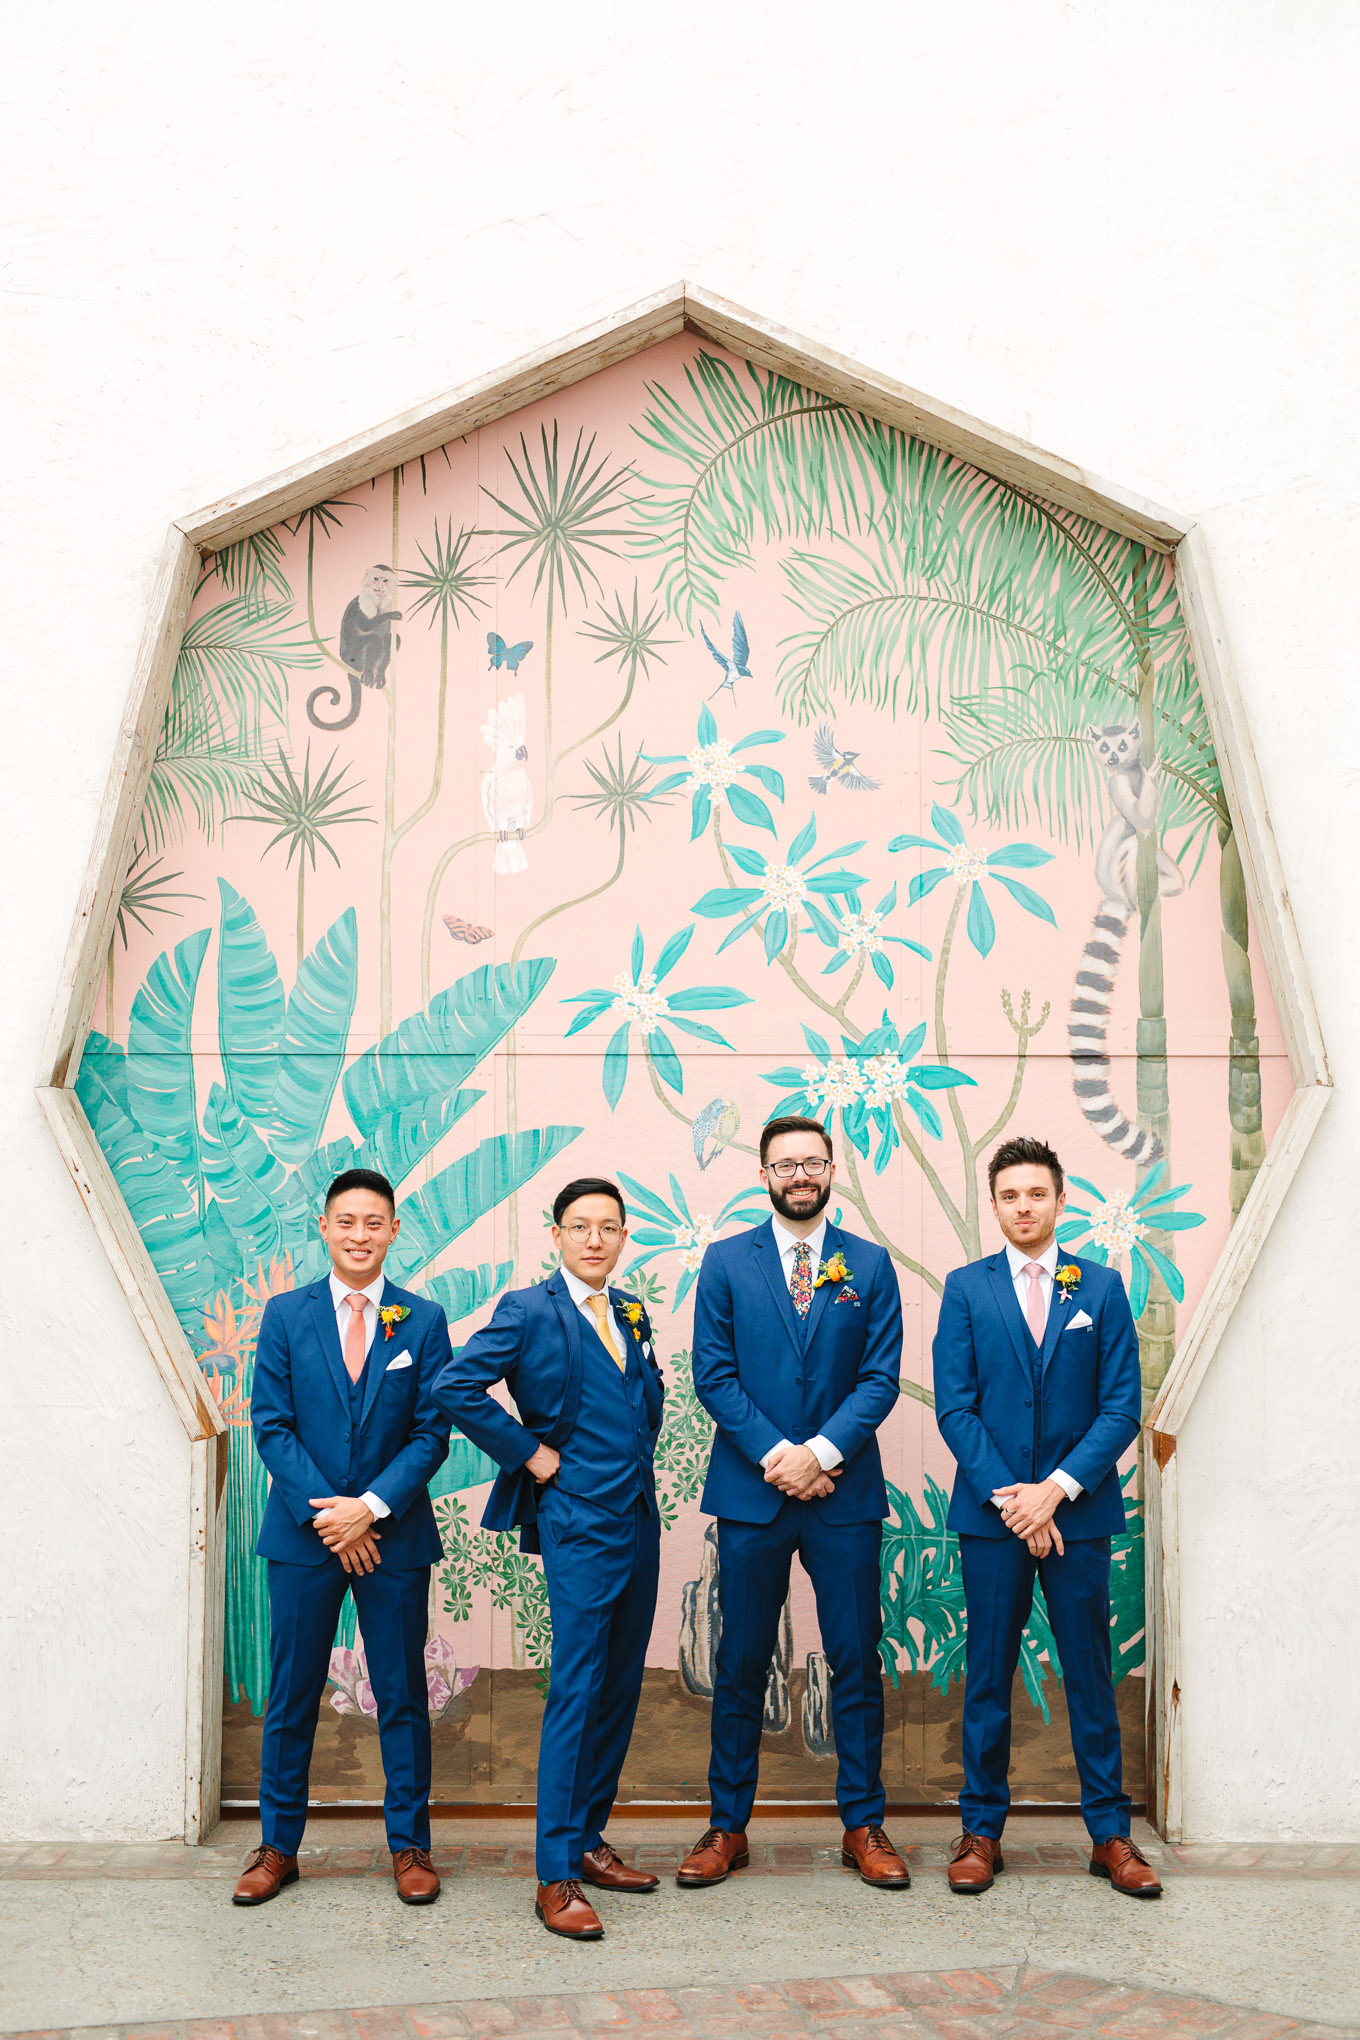 Groomsmen in blue suits | Colorful Downtown Los Angeles Valentine Wedding | Los Angeles wedding photographer | #losangeleswedding #colorfulwedding #DTLA #valentinedtla   Source: Mary Costa Photography | Los Angeles